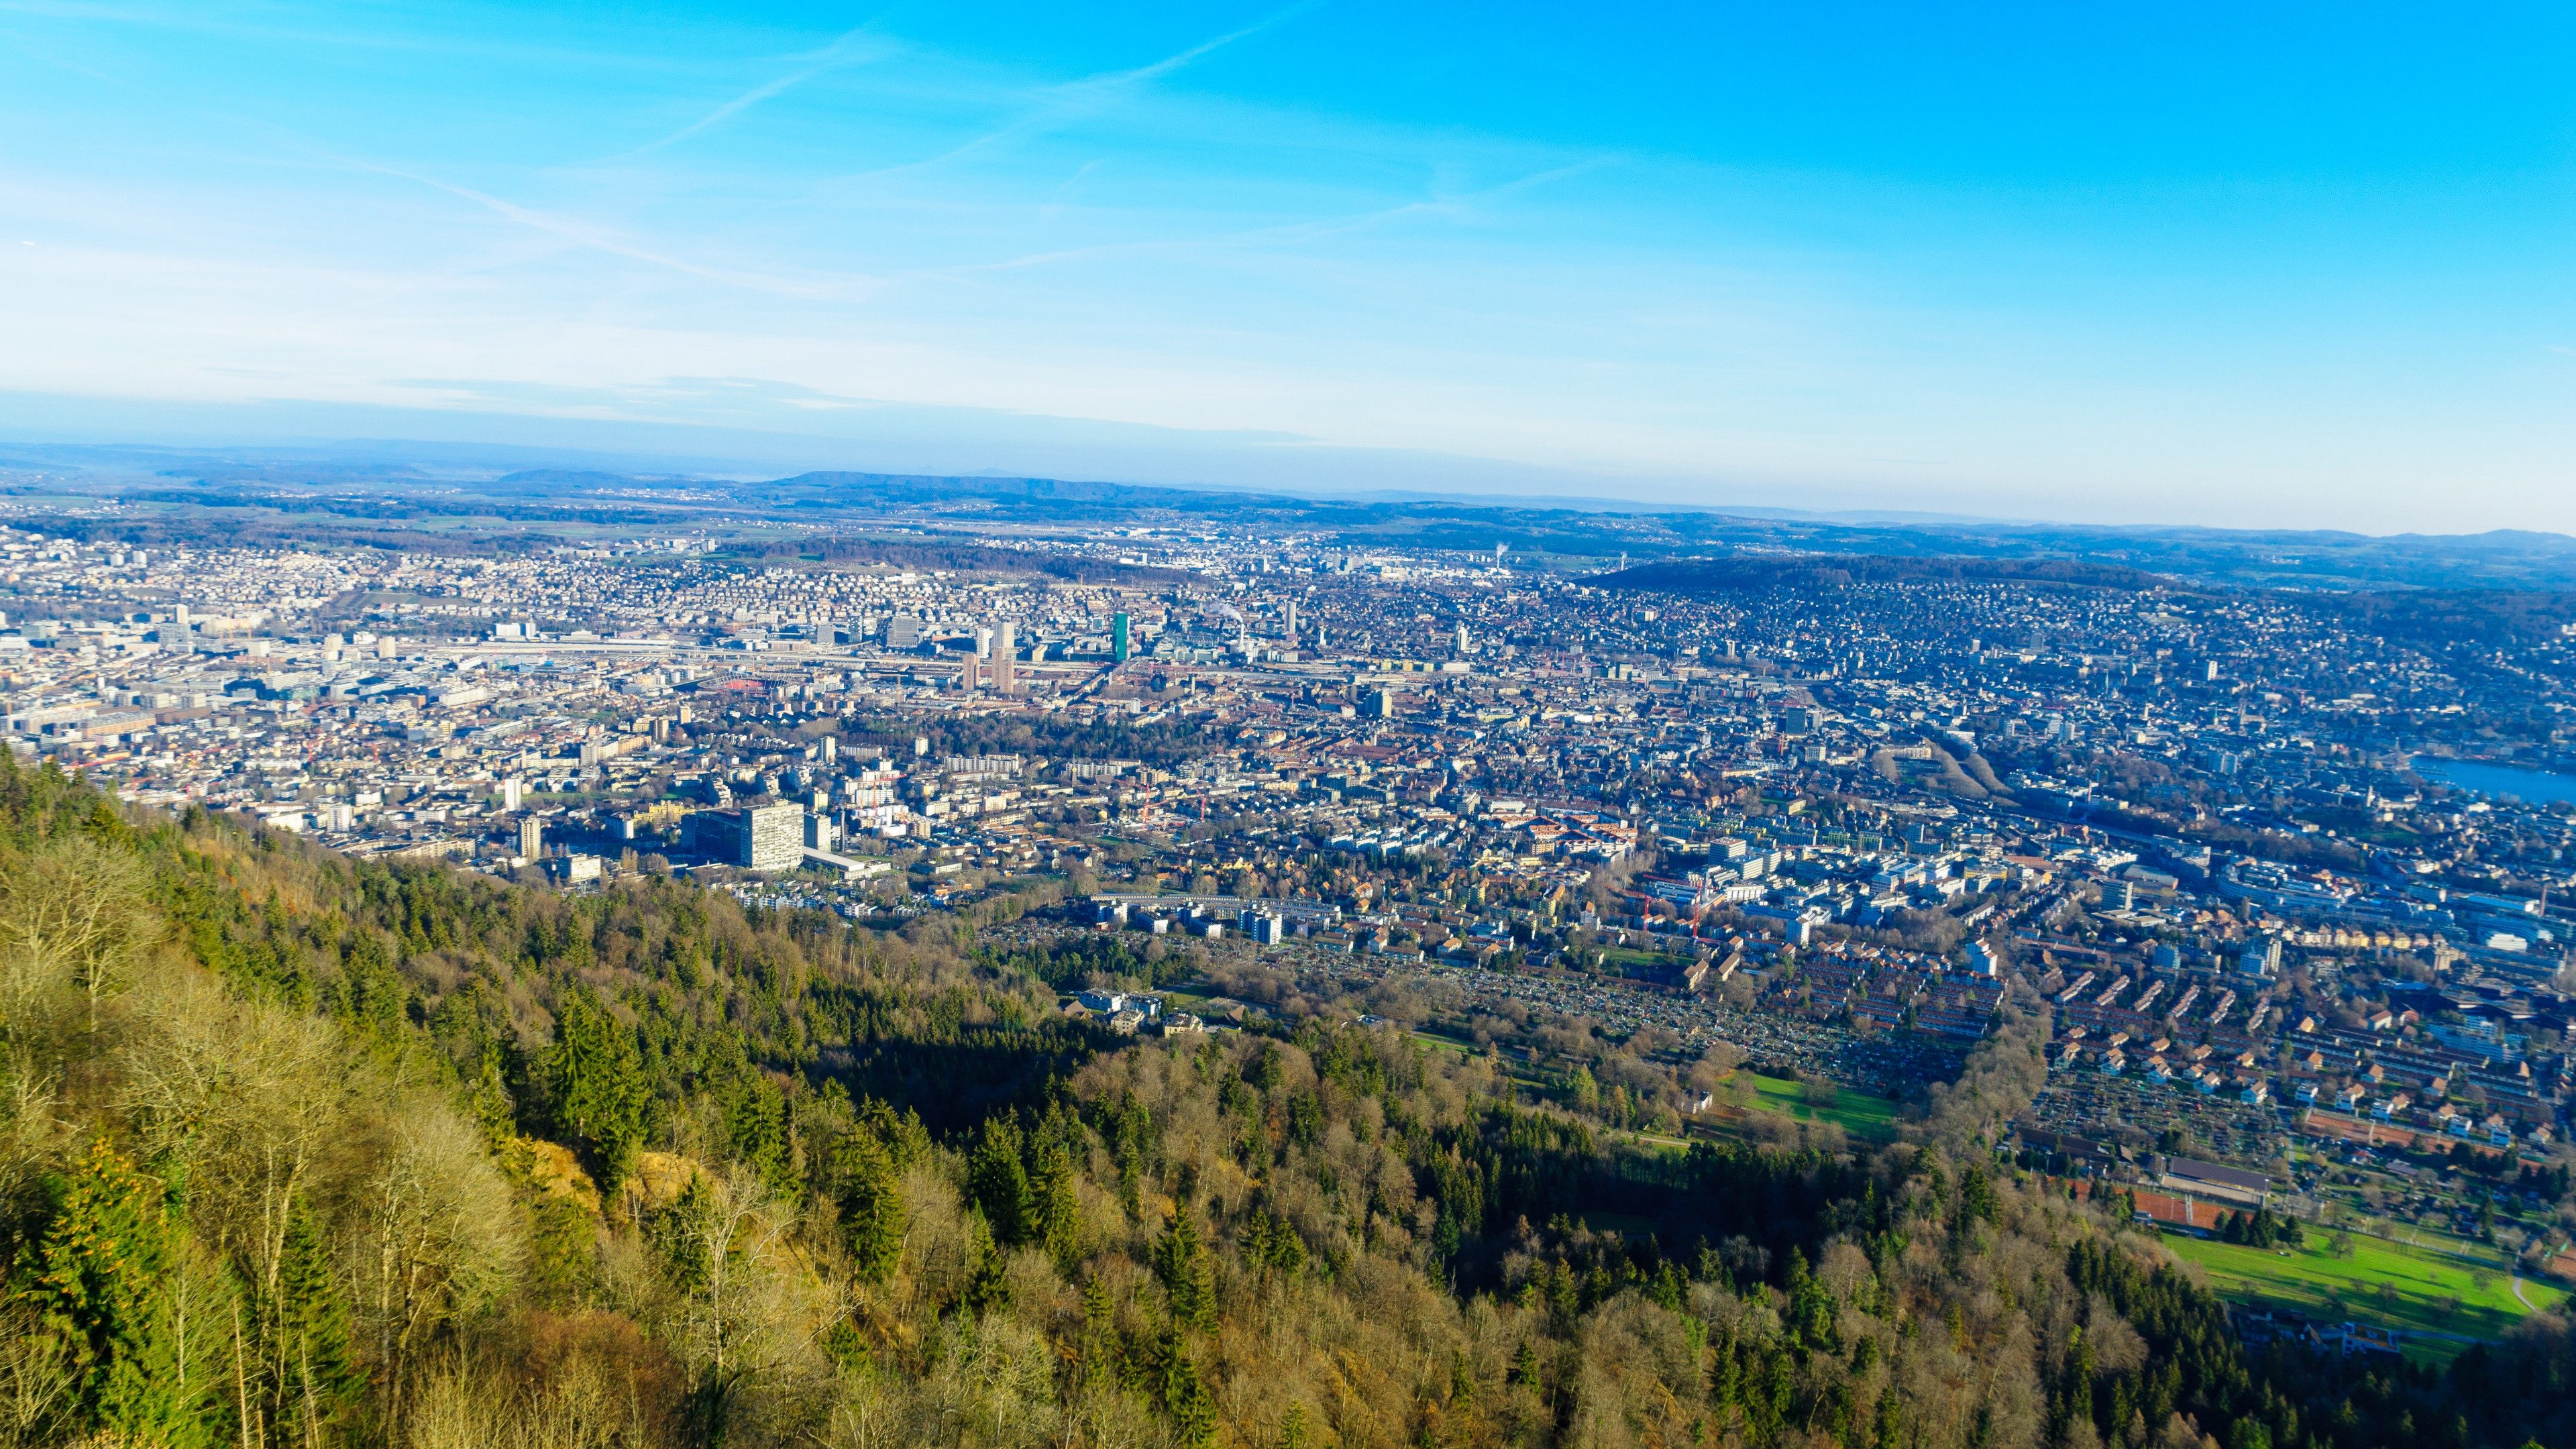 View of the city of Zurich from Uetliberg Mountain. Switzerland